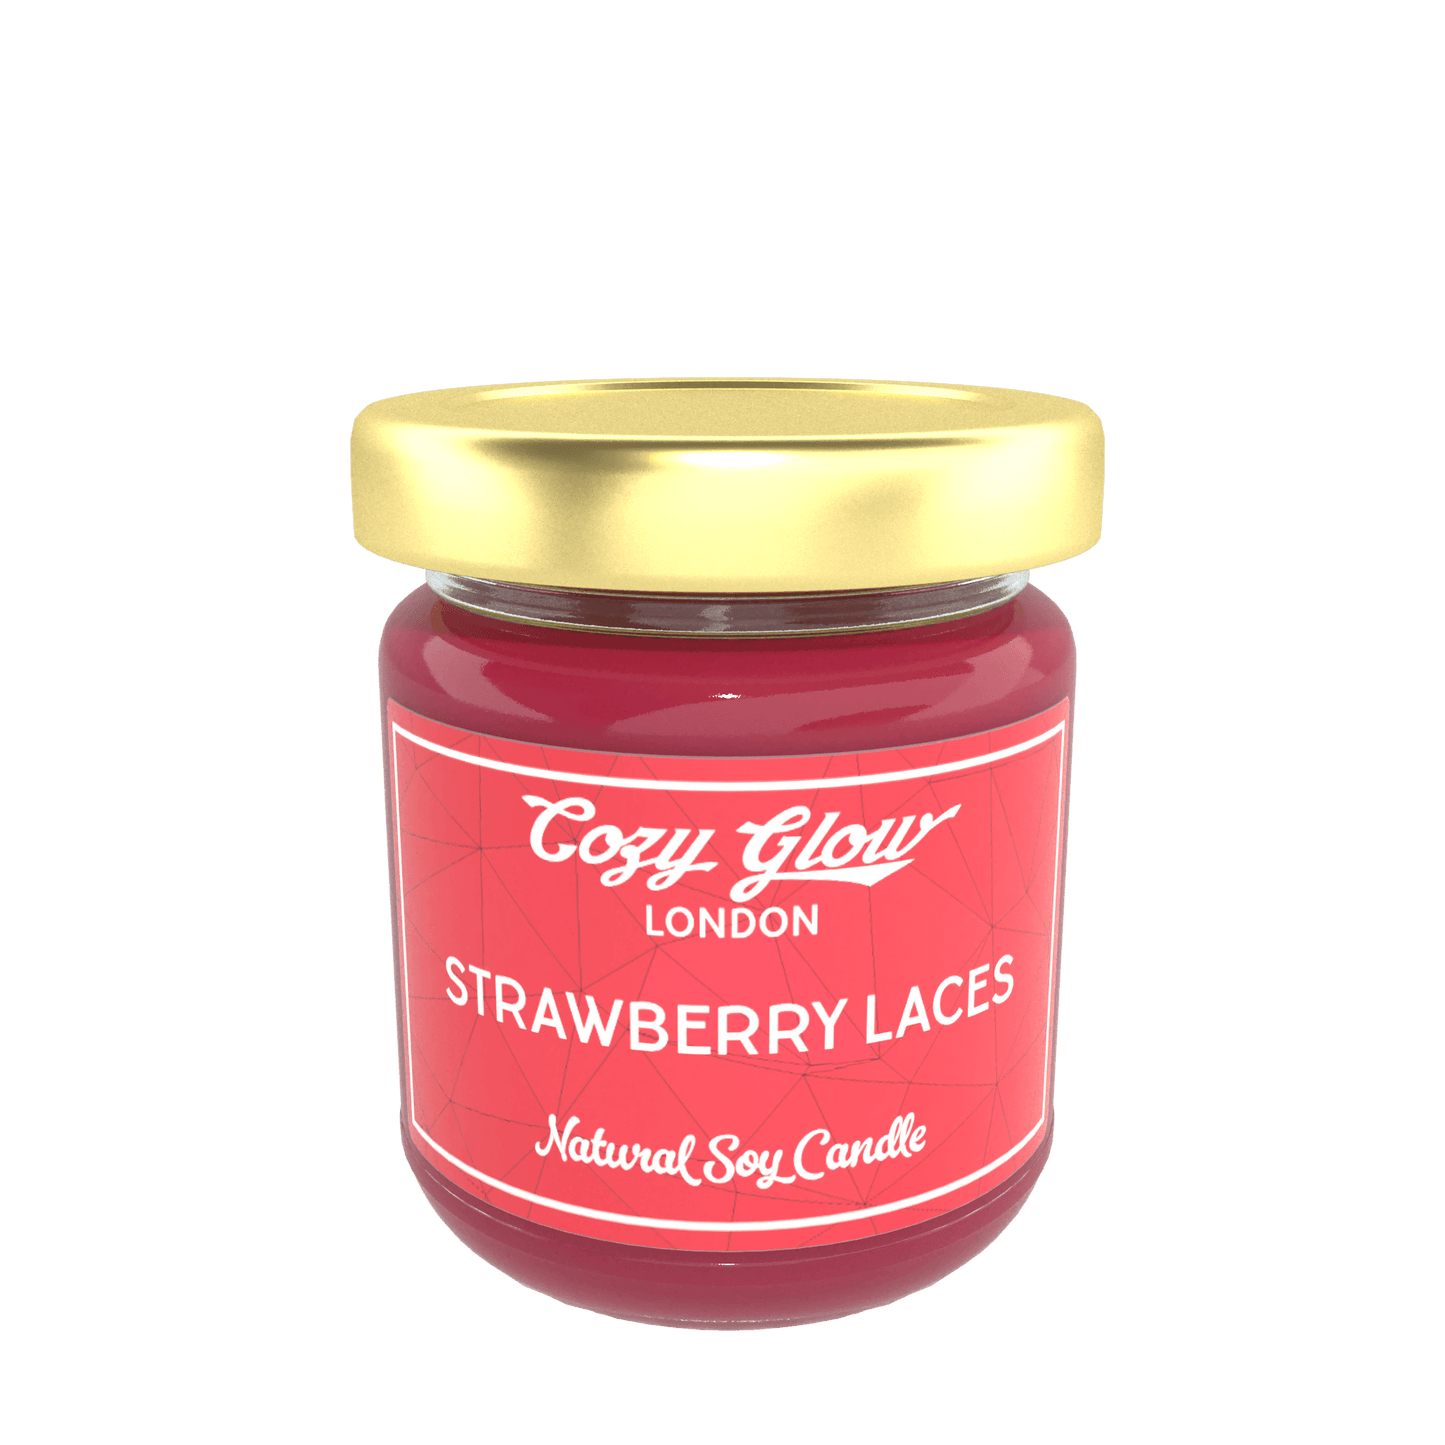 Cozy Glow Strawberry Laces Regular Soy Candle